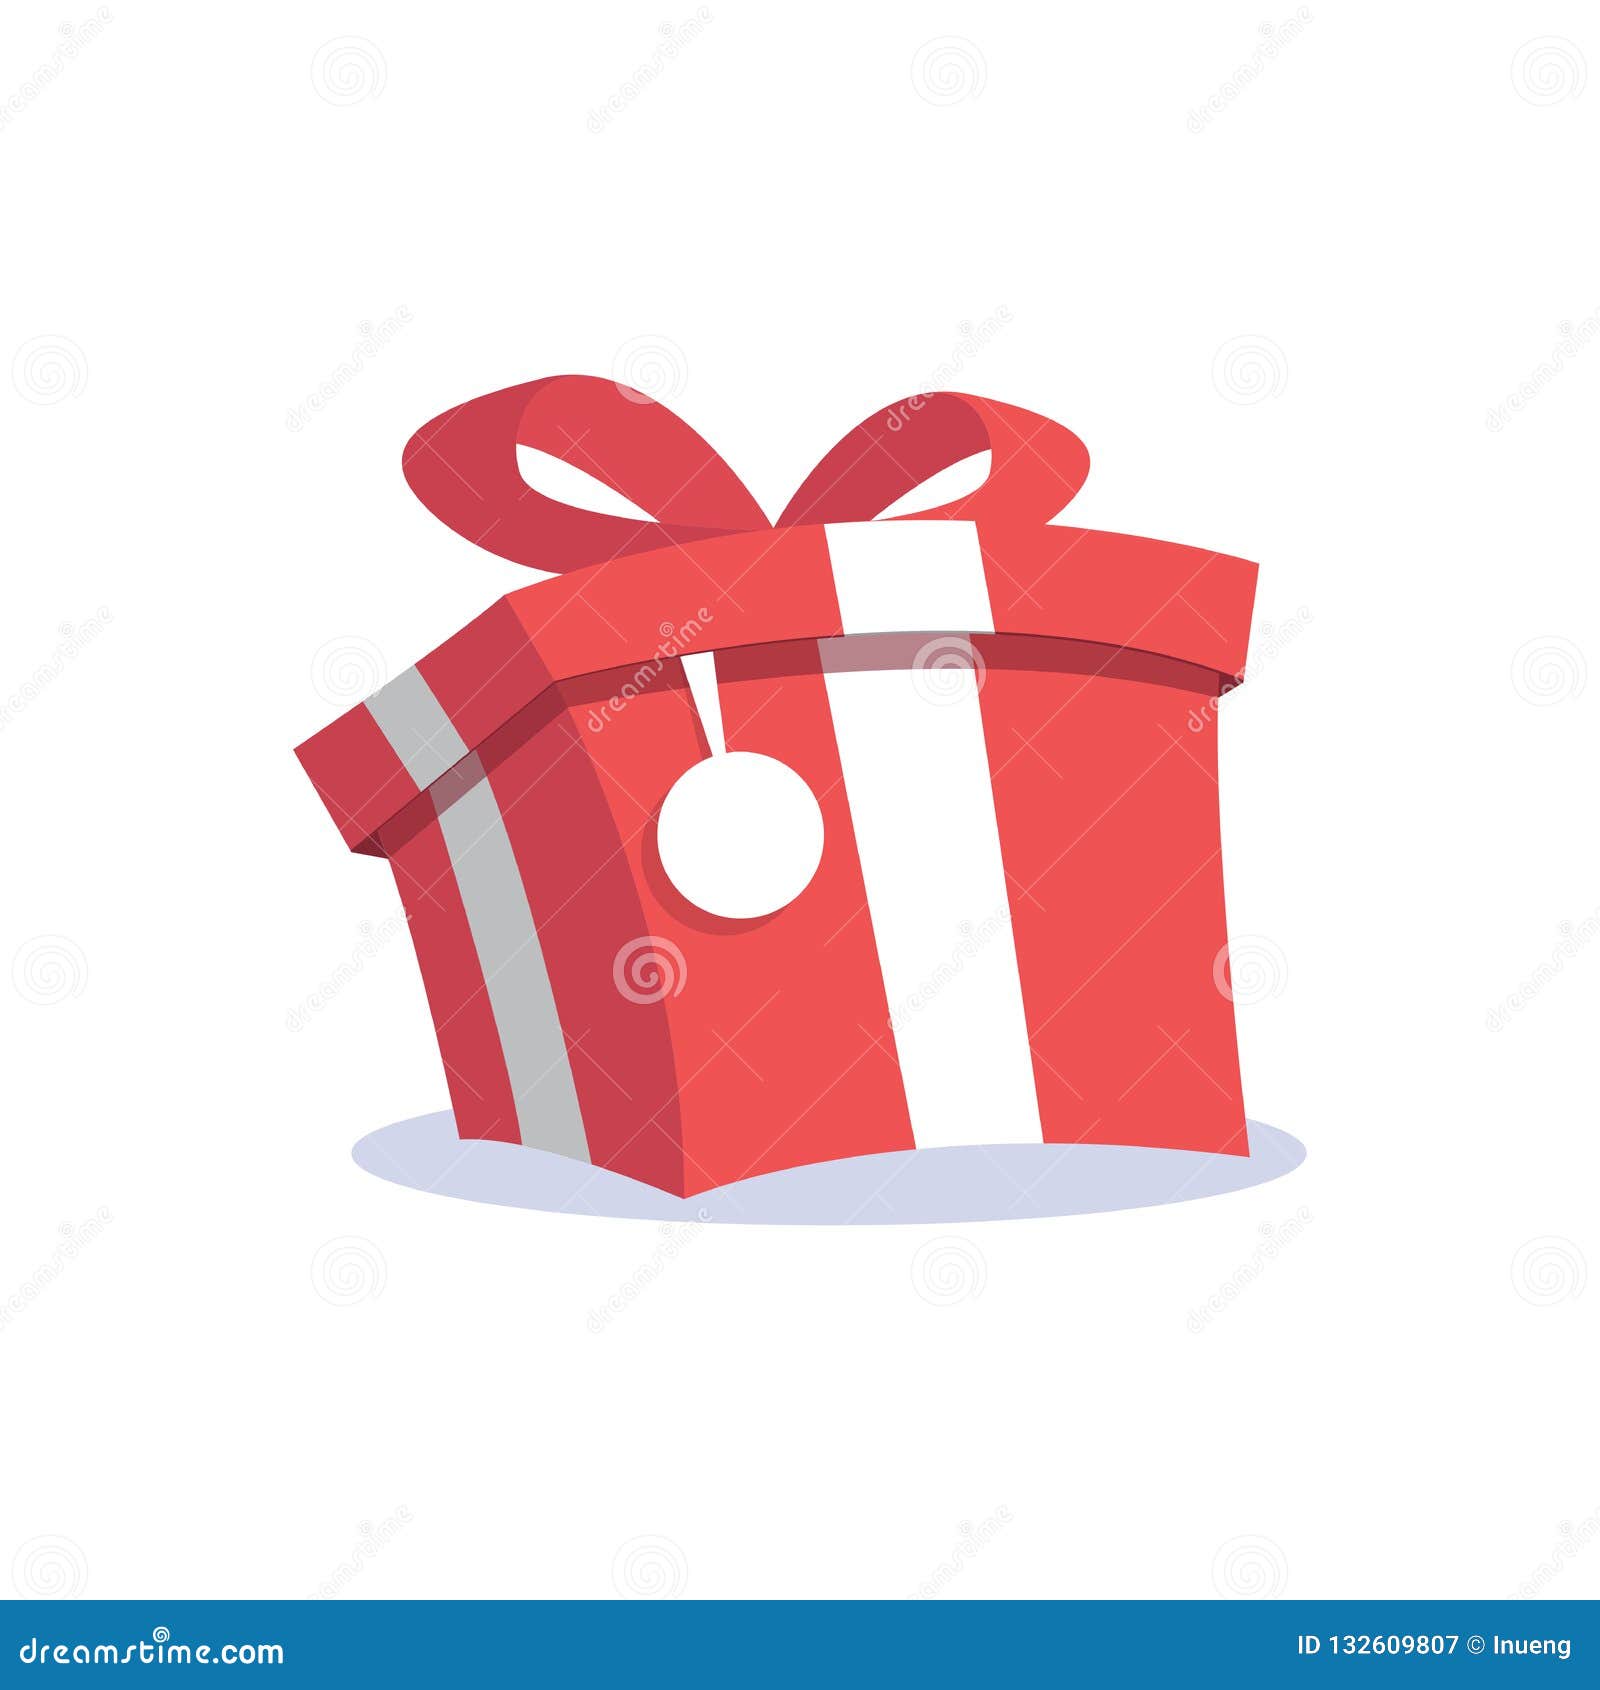 Red Gift Box and Label Cartoon Icon Flat Design. Stock Vector ...